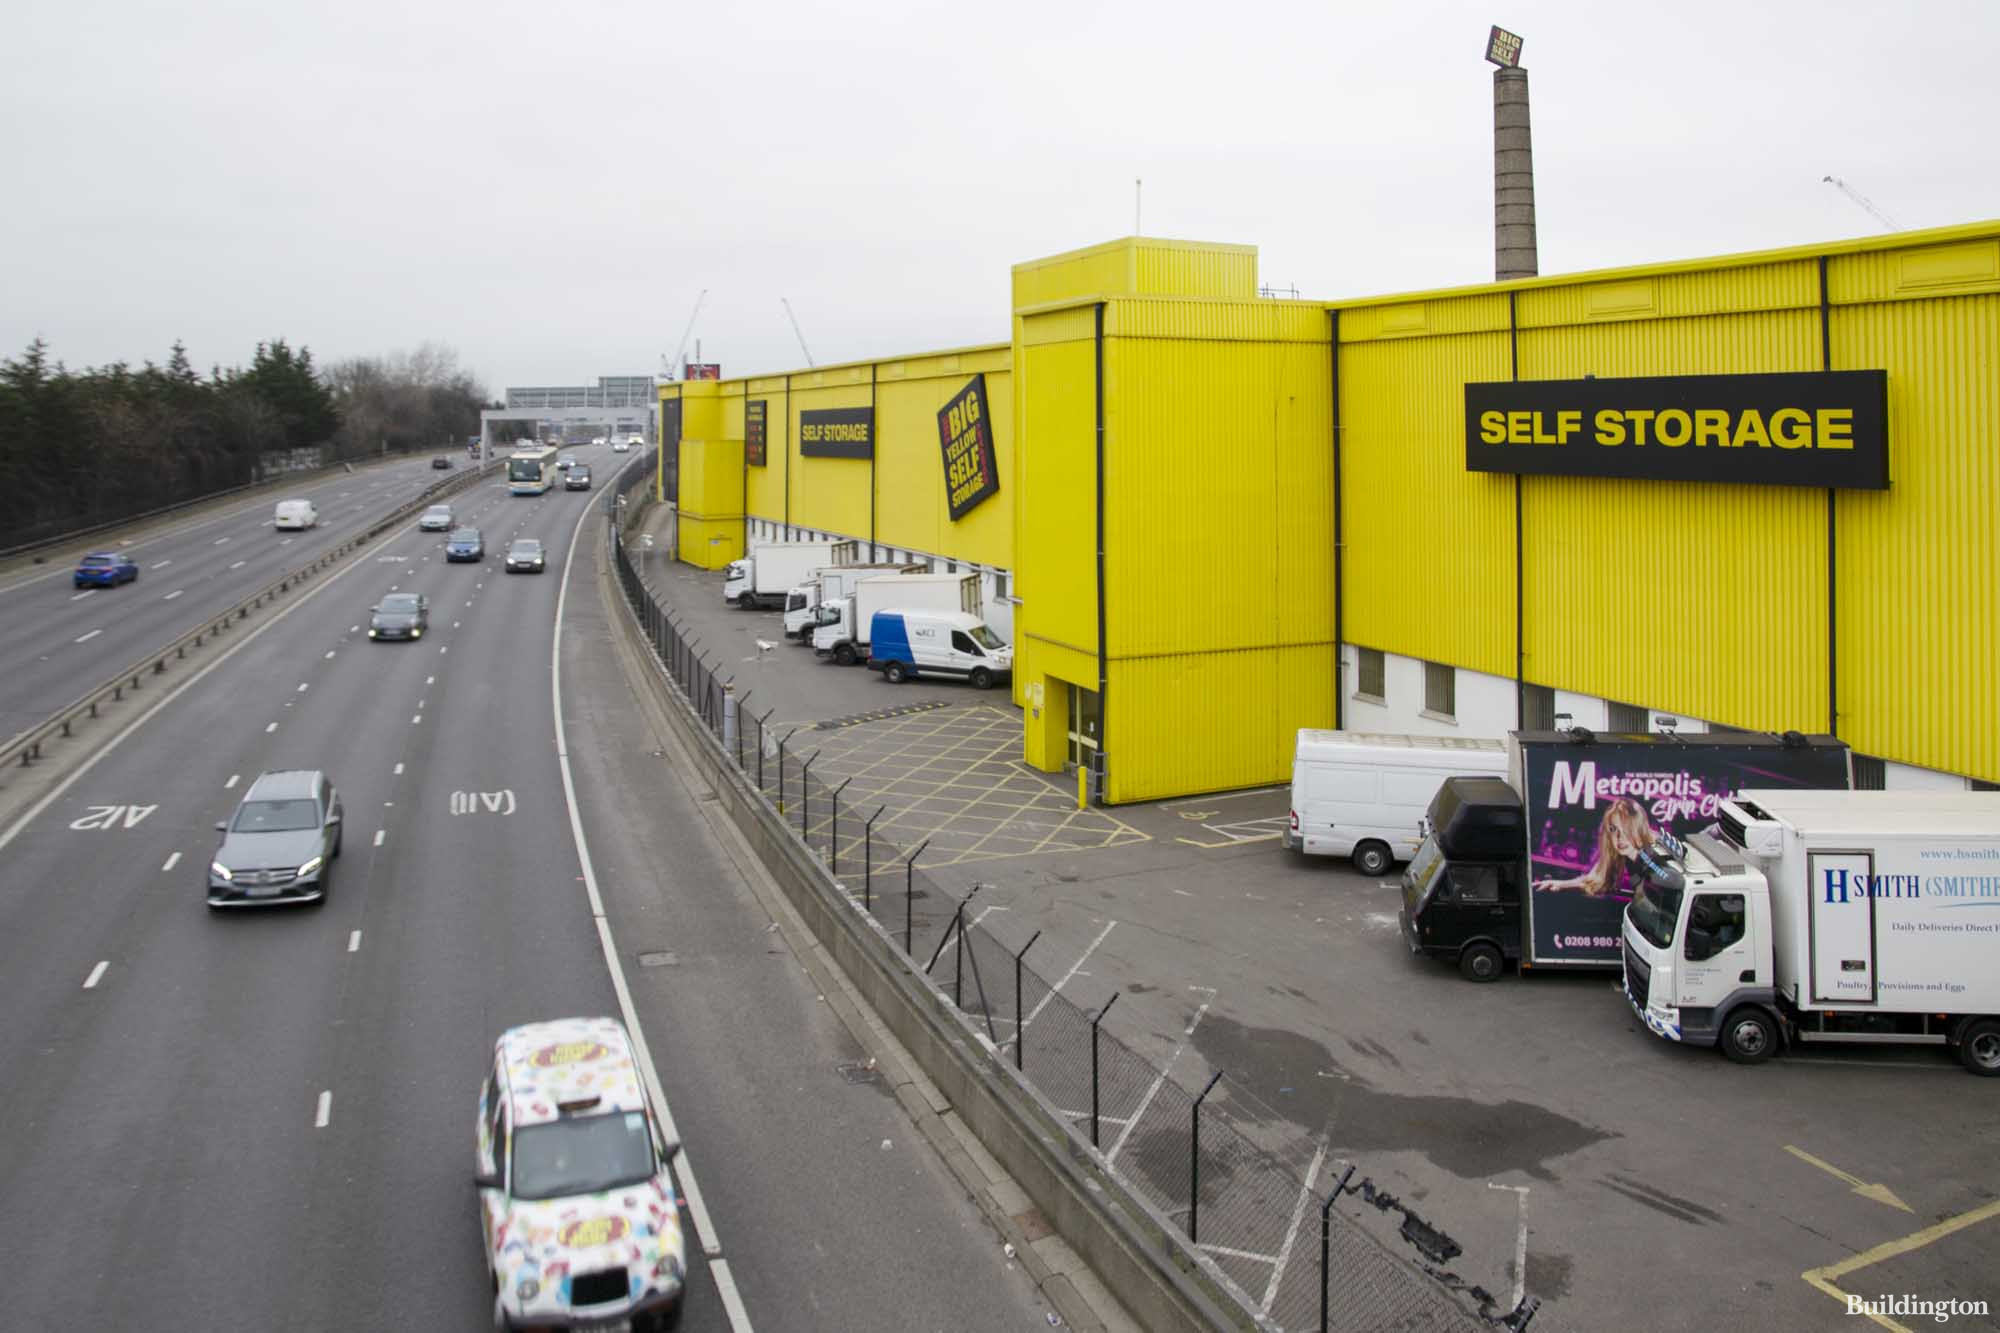 Big Yellow Self Storage building at 400 Wick Lane in Bow, London E3.